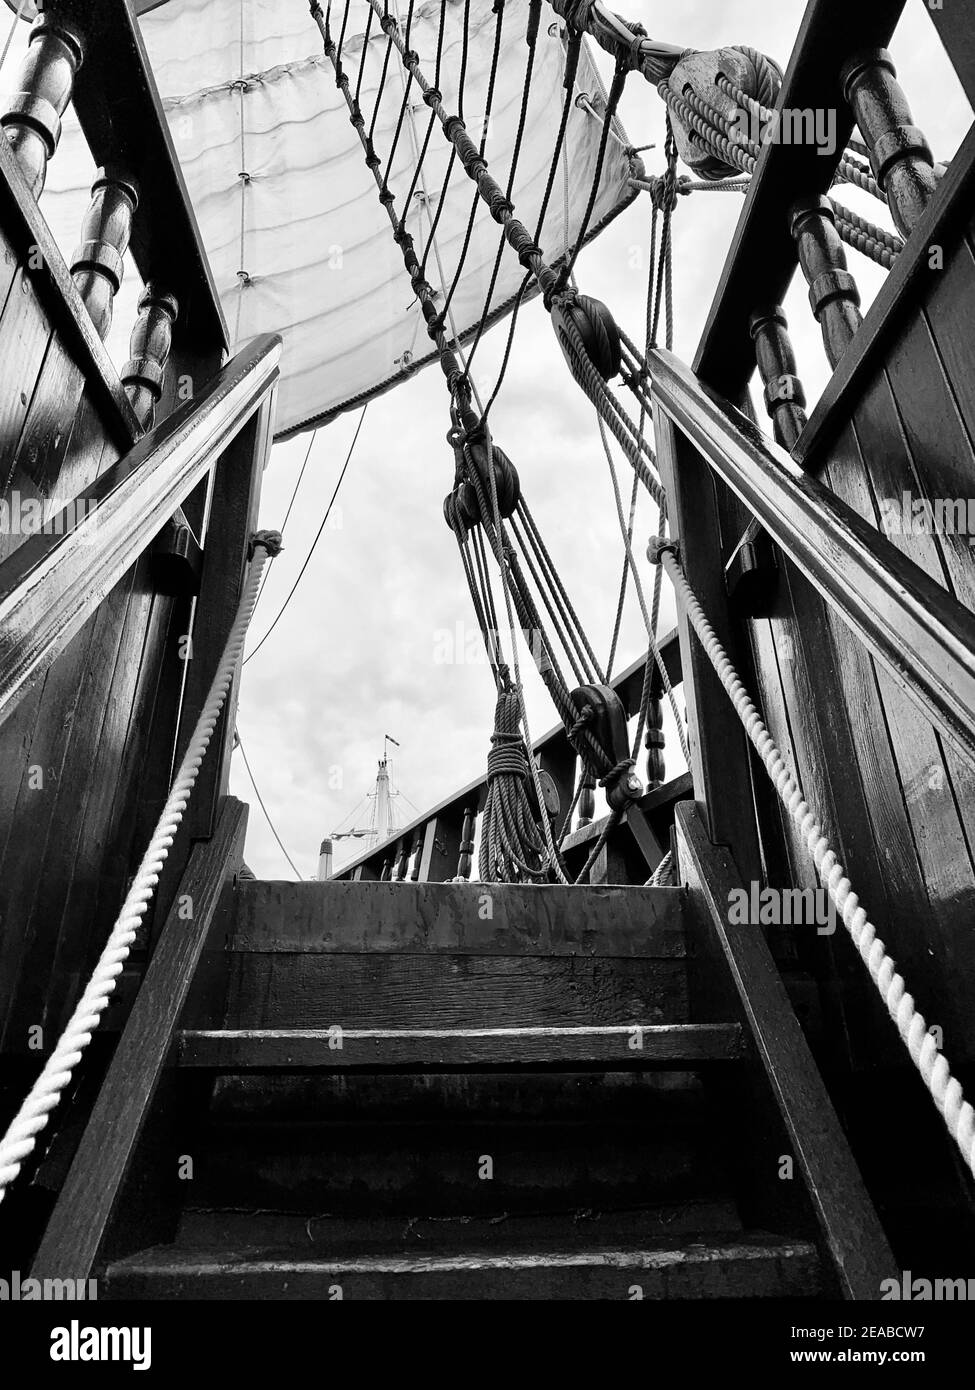 Stairs to the upper deck and rigging on the historic merchant ship Lisa von Lübeck Stock Photo